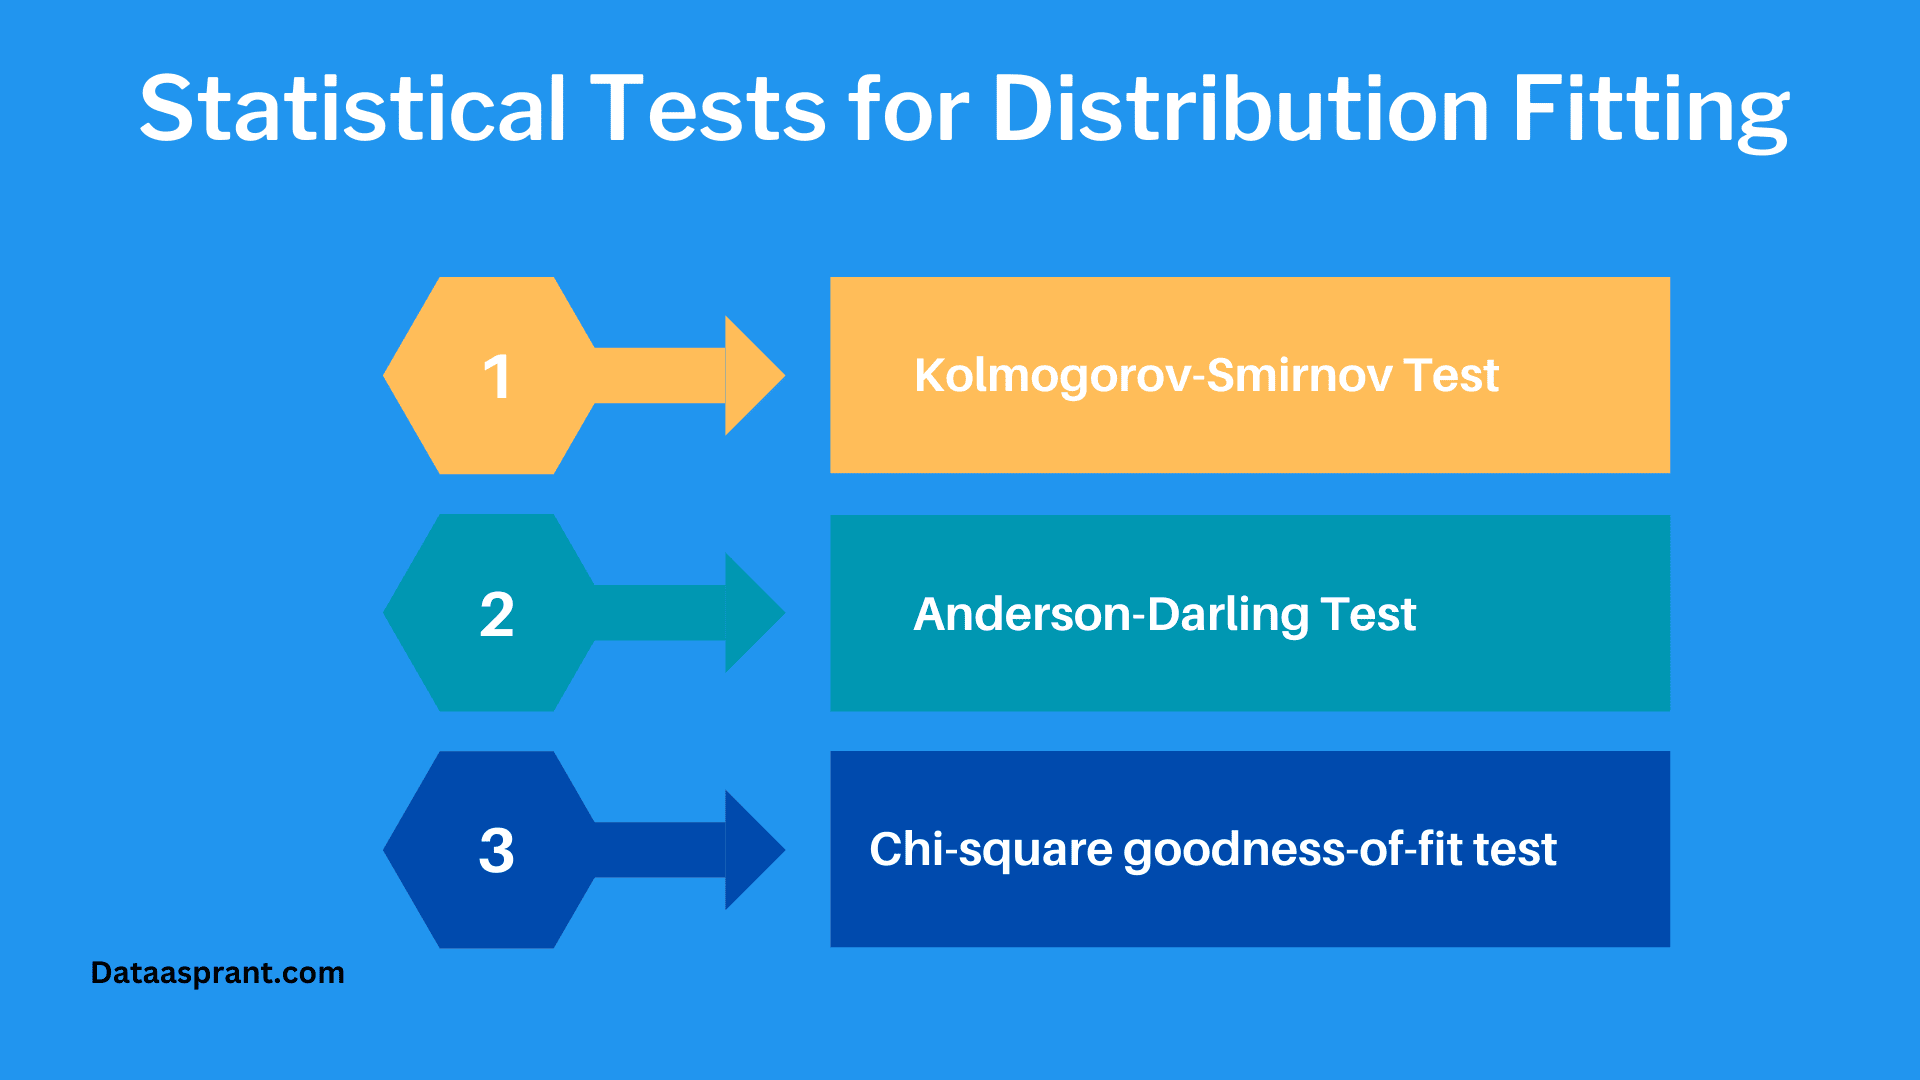 Statistical Tests for Distribution Fitting